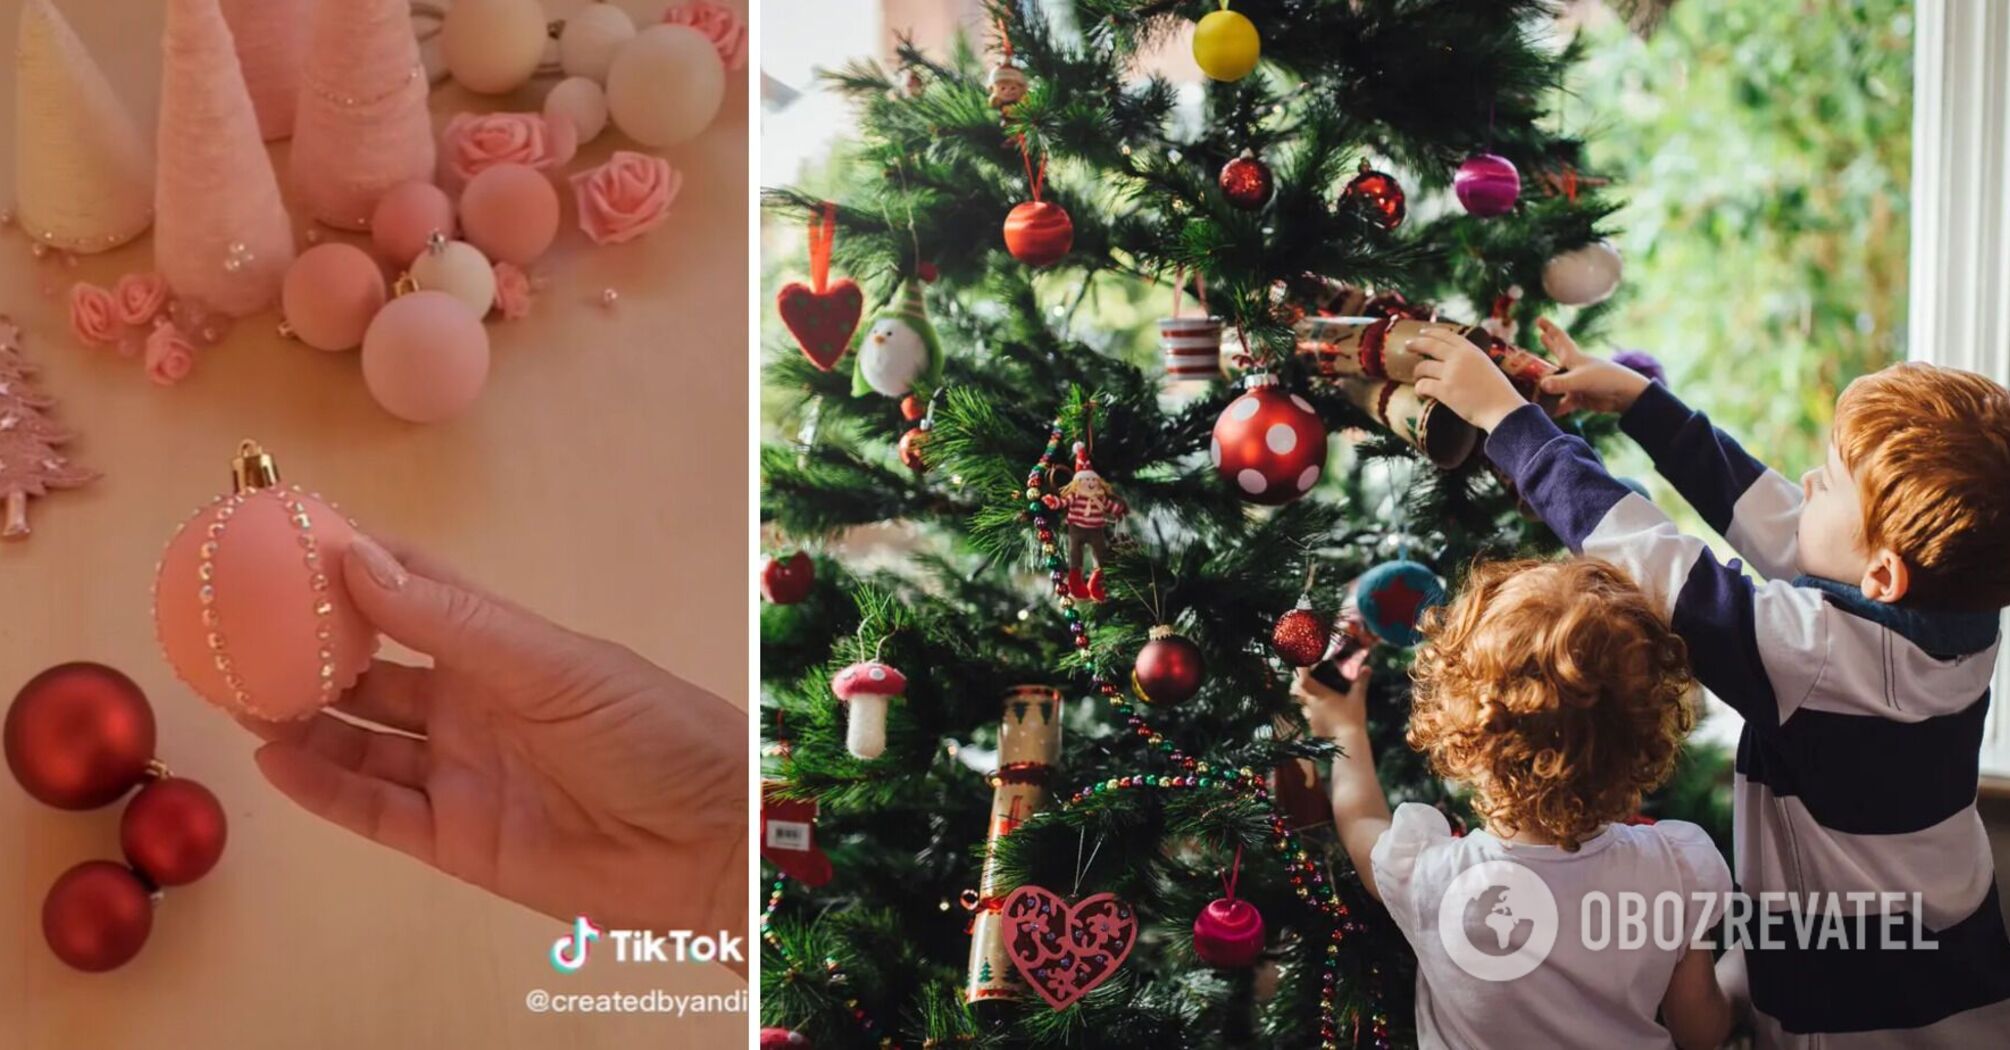 The cheapest way to update your Christmas decor: a simple life hack from TikTok 